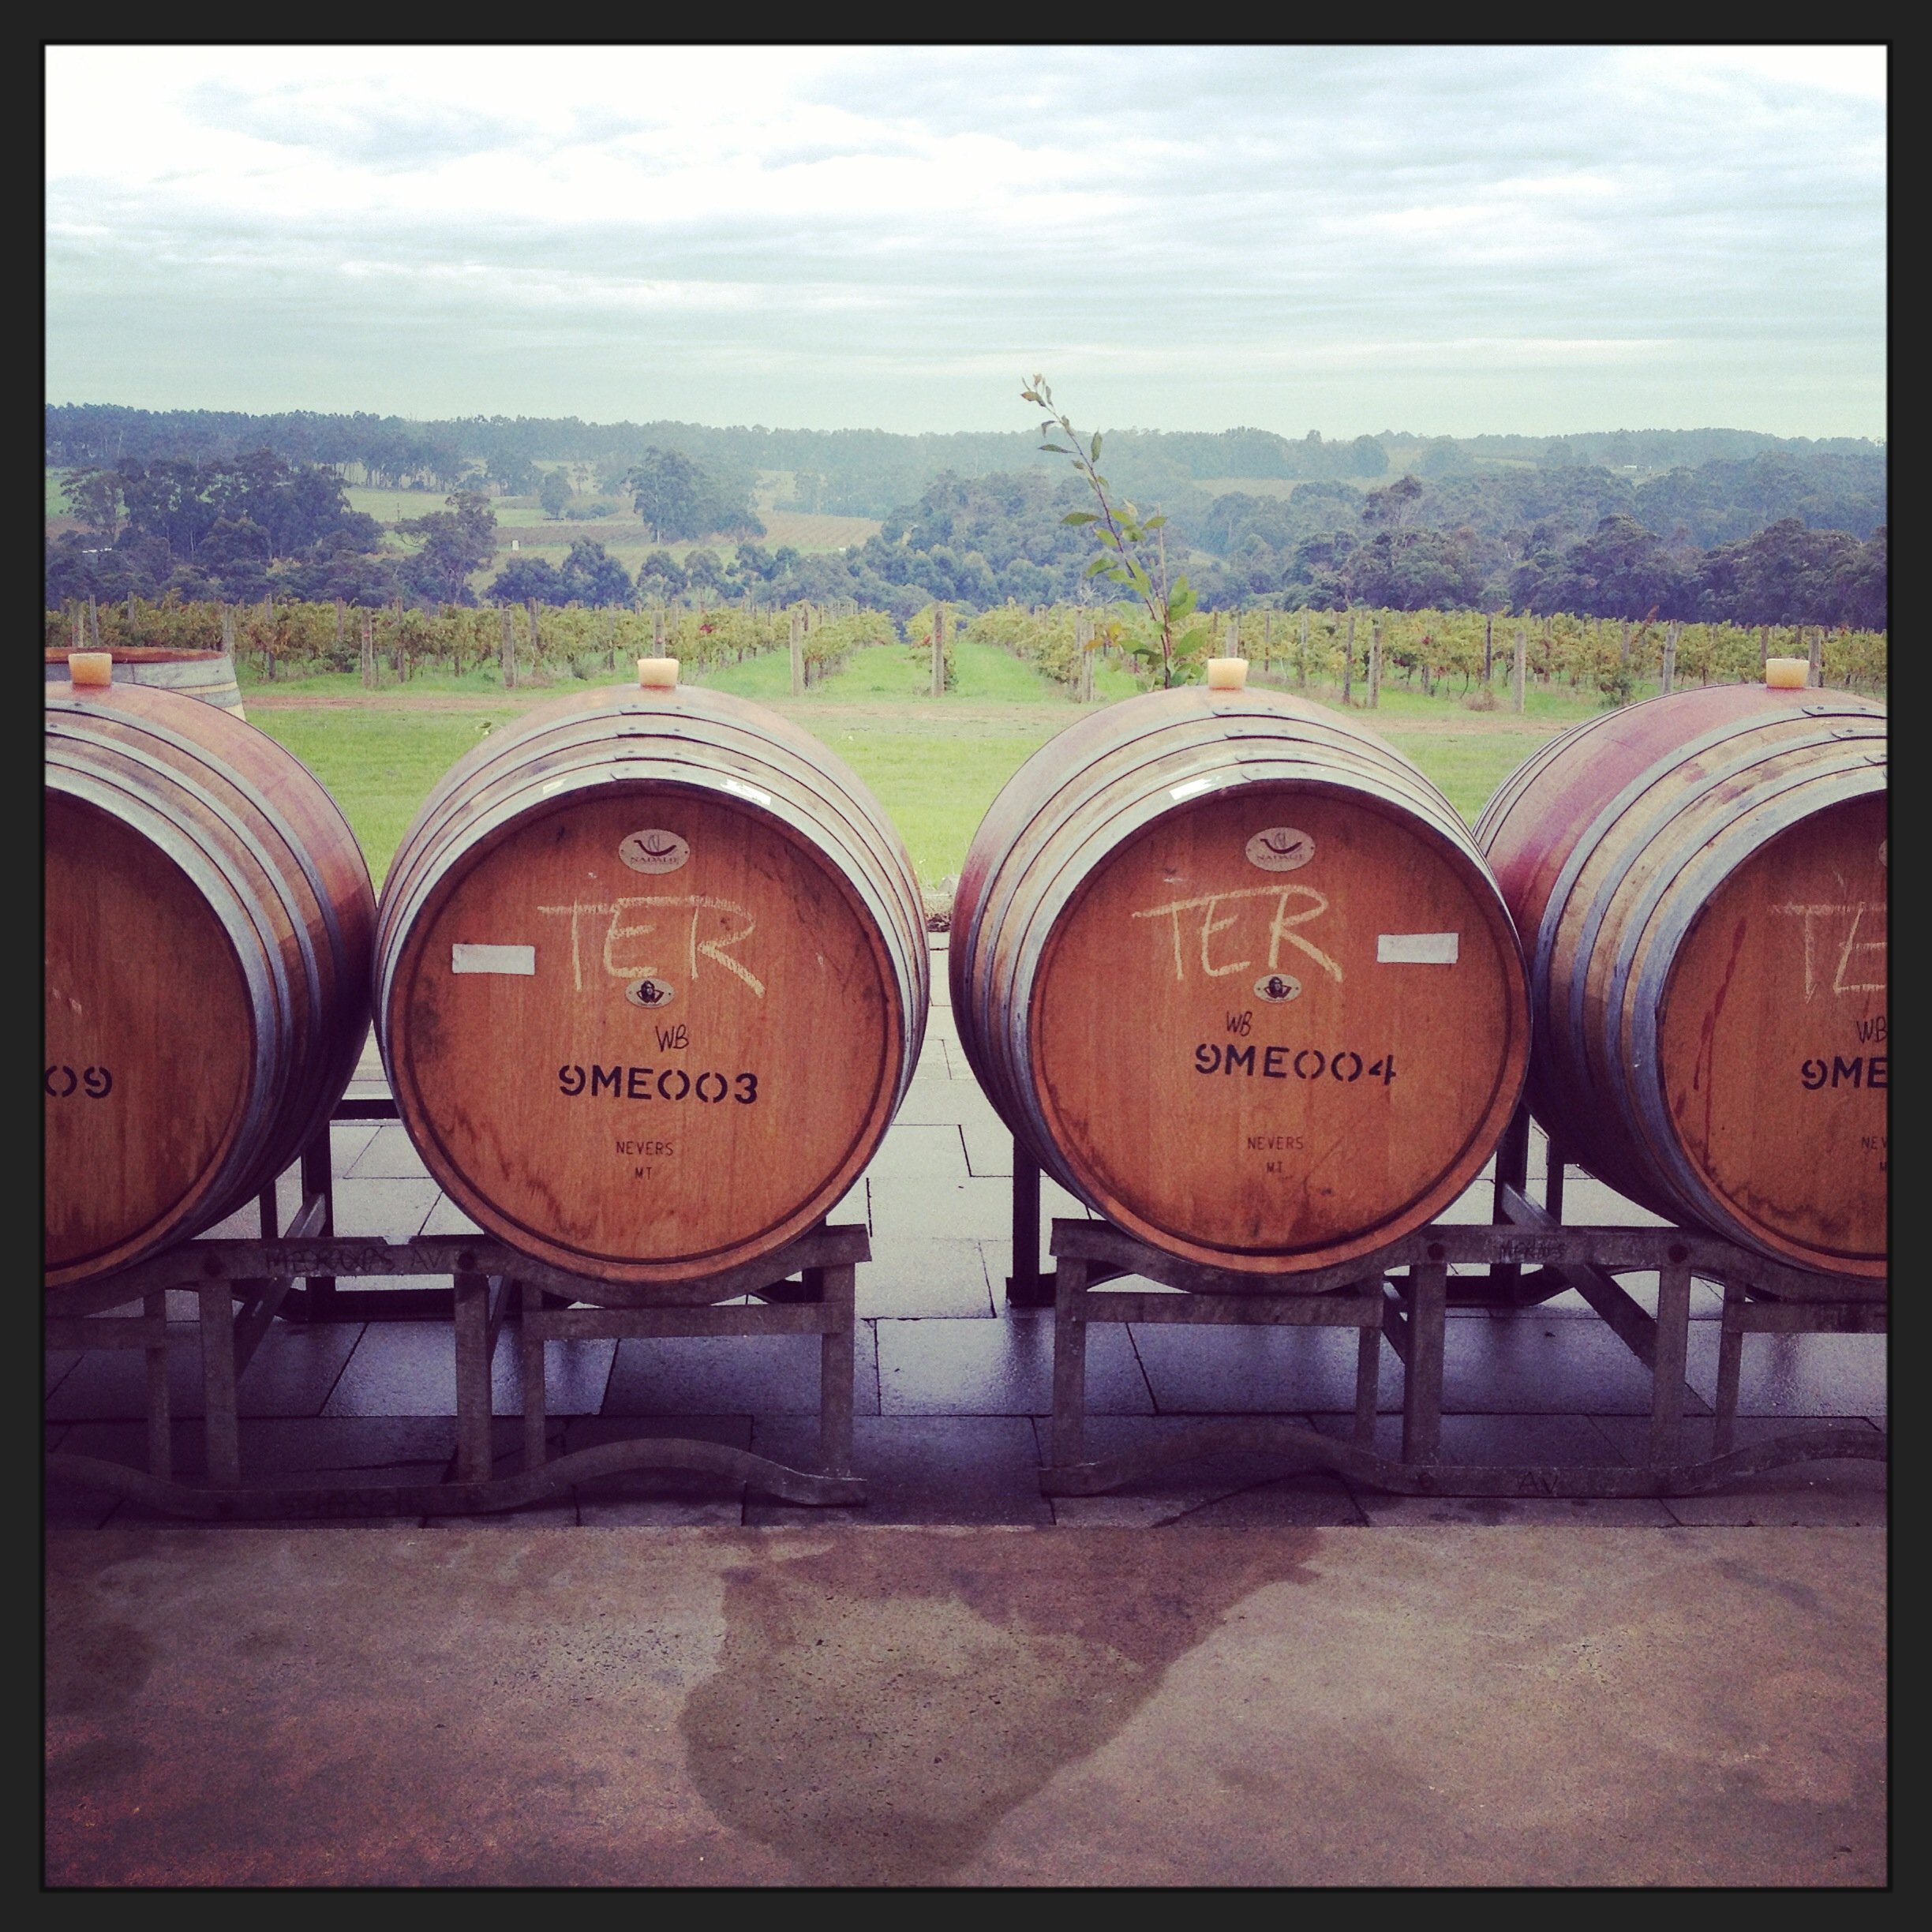 French oak barrels at AMATO VINO with a view looking north